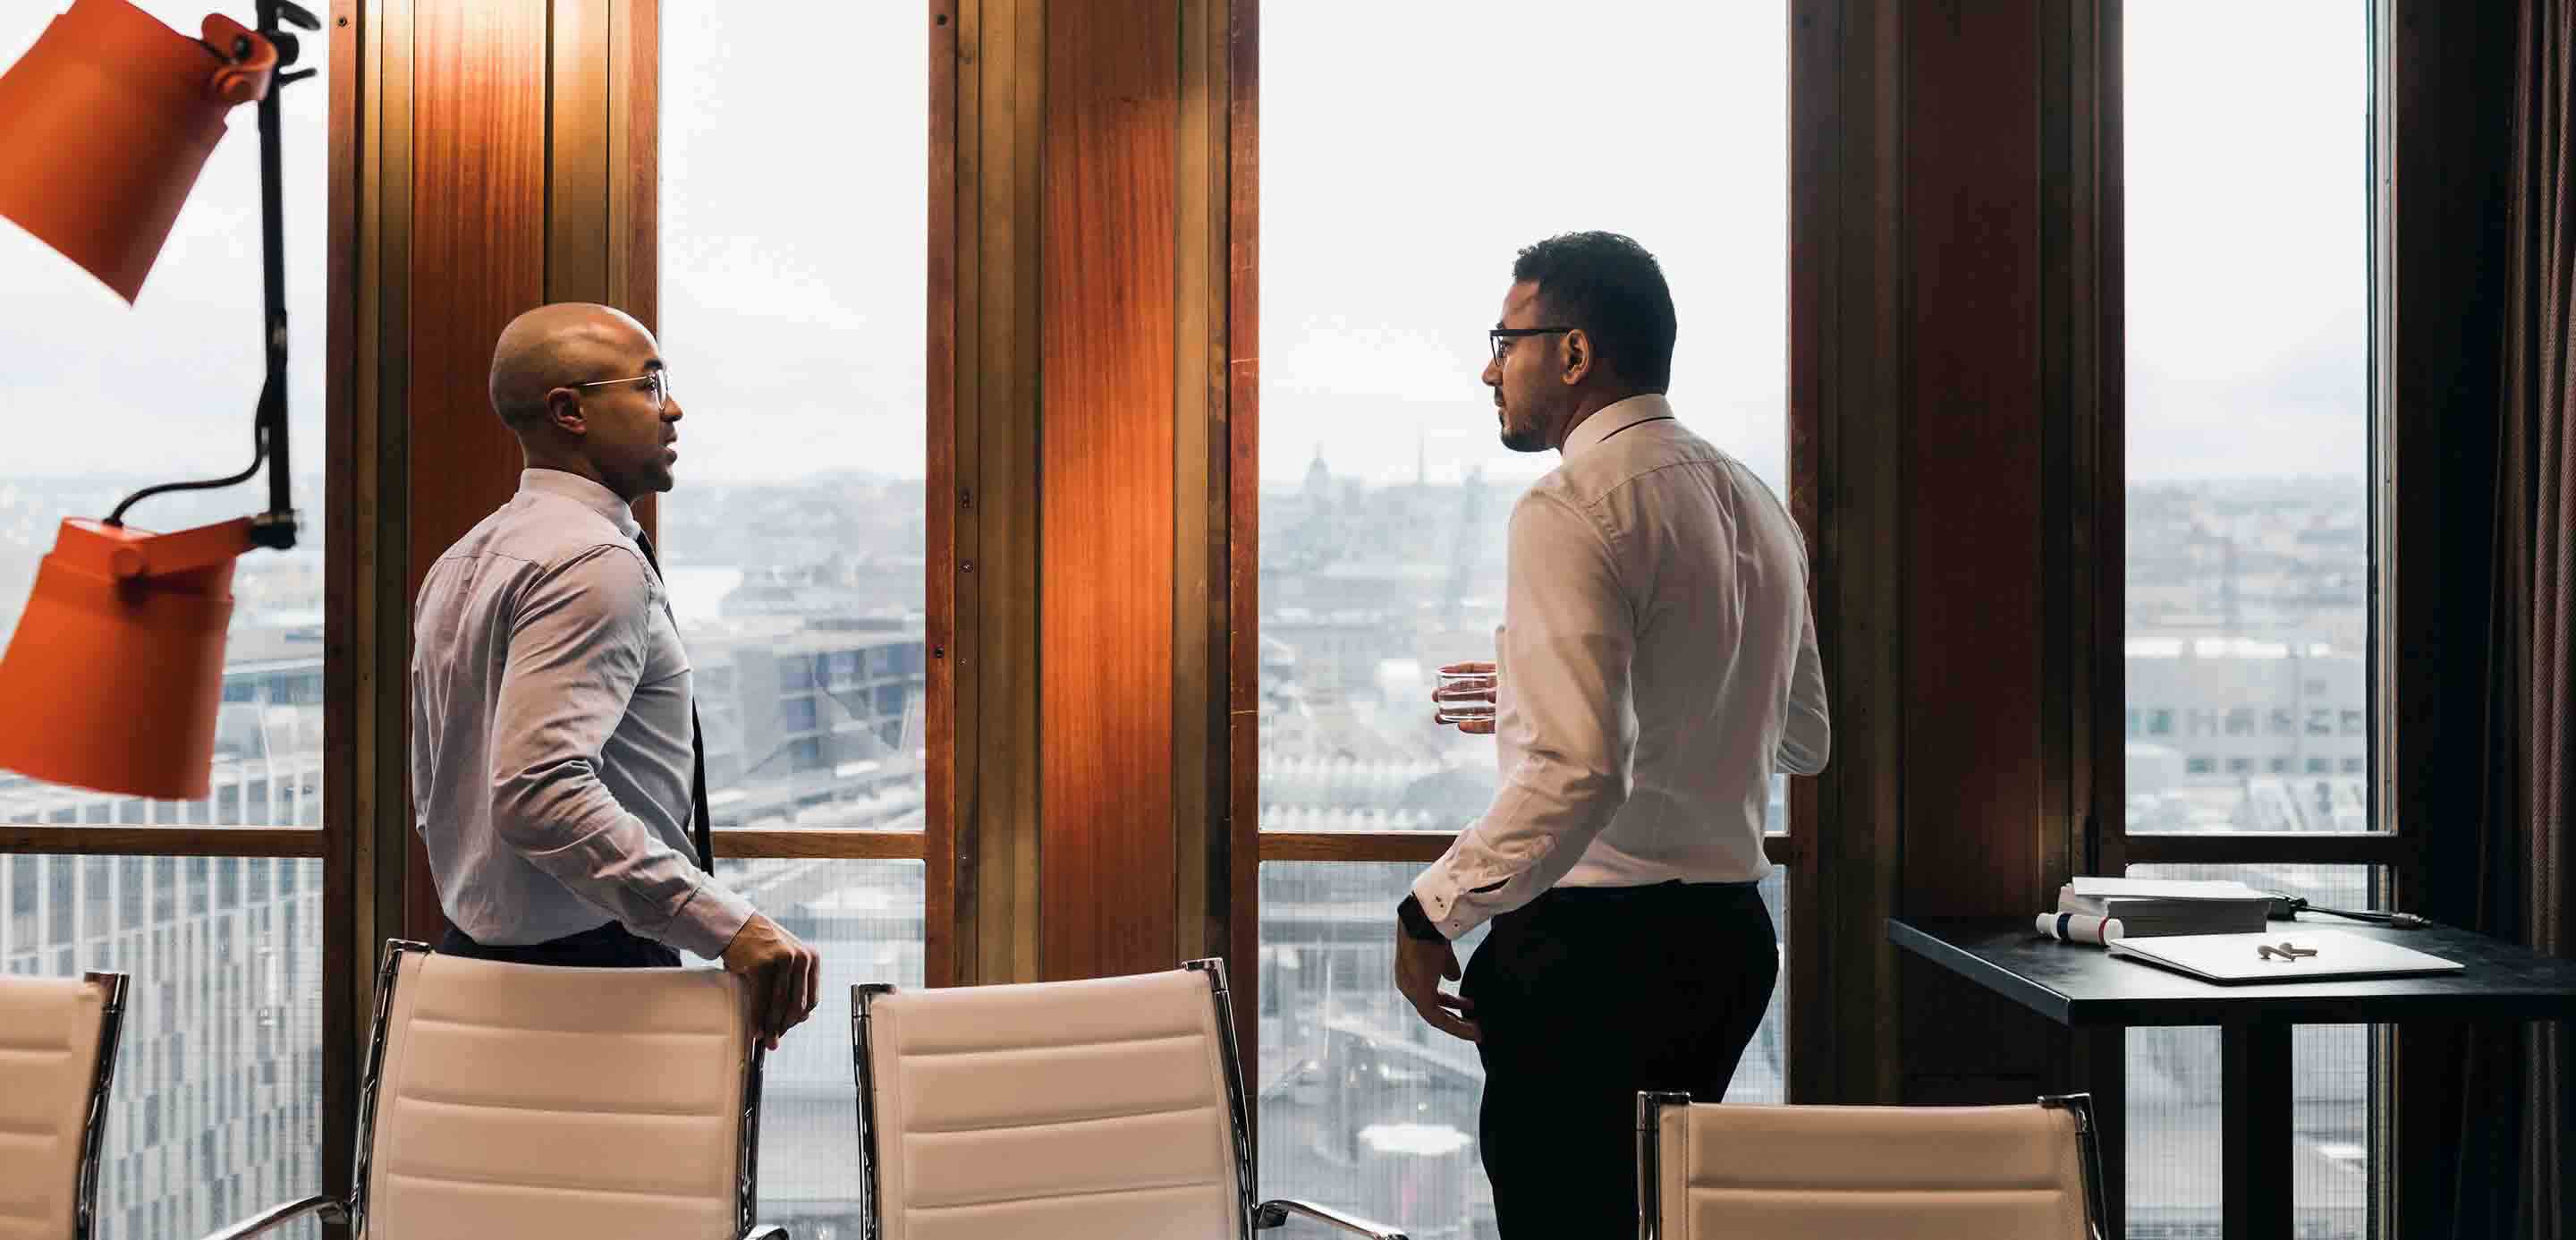 Two people in a corporate environment standing in front of a window